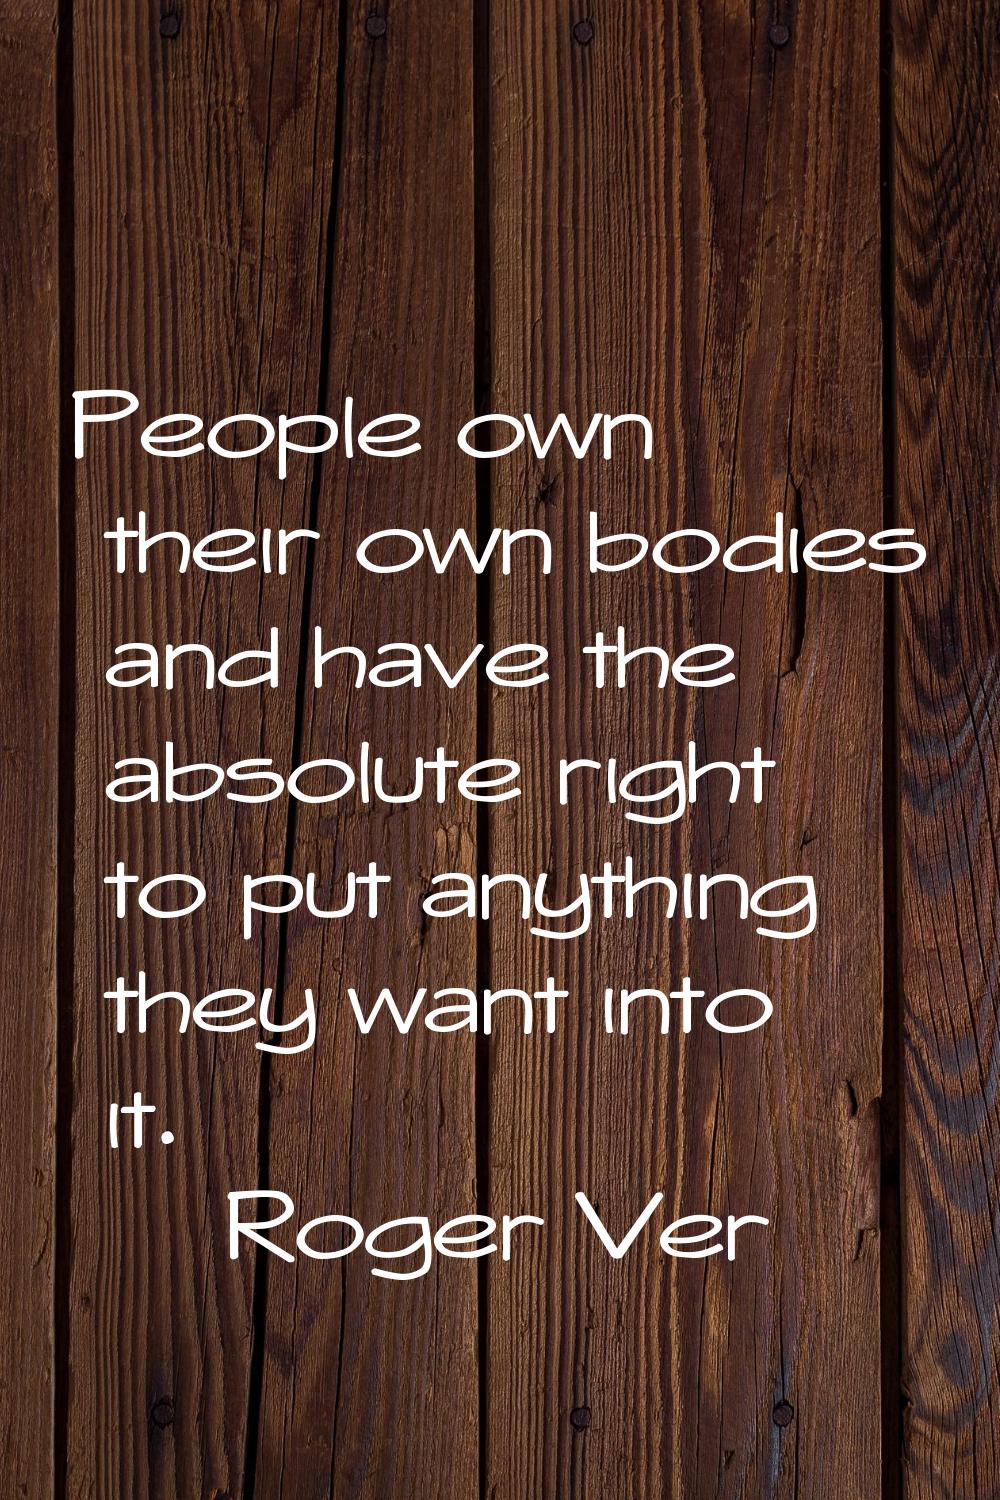 People own their own bodies and have the absolute right to put anything they want into it.